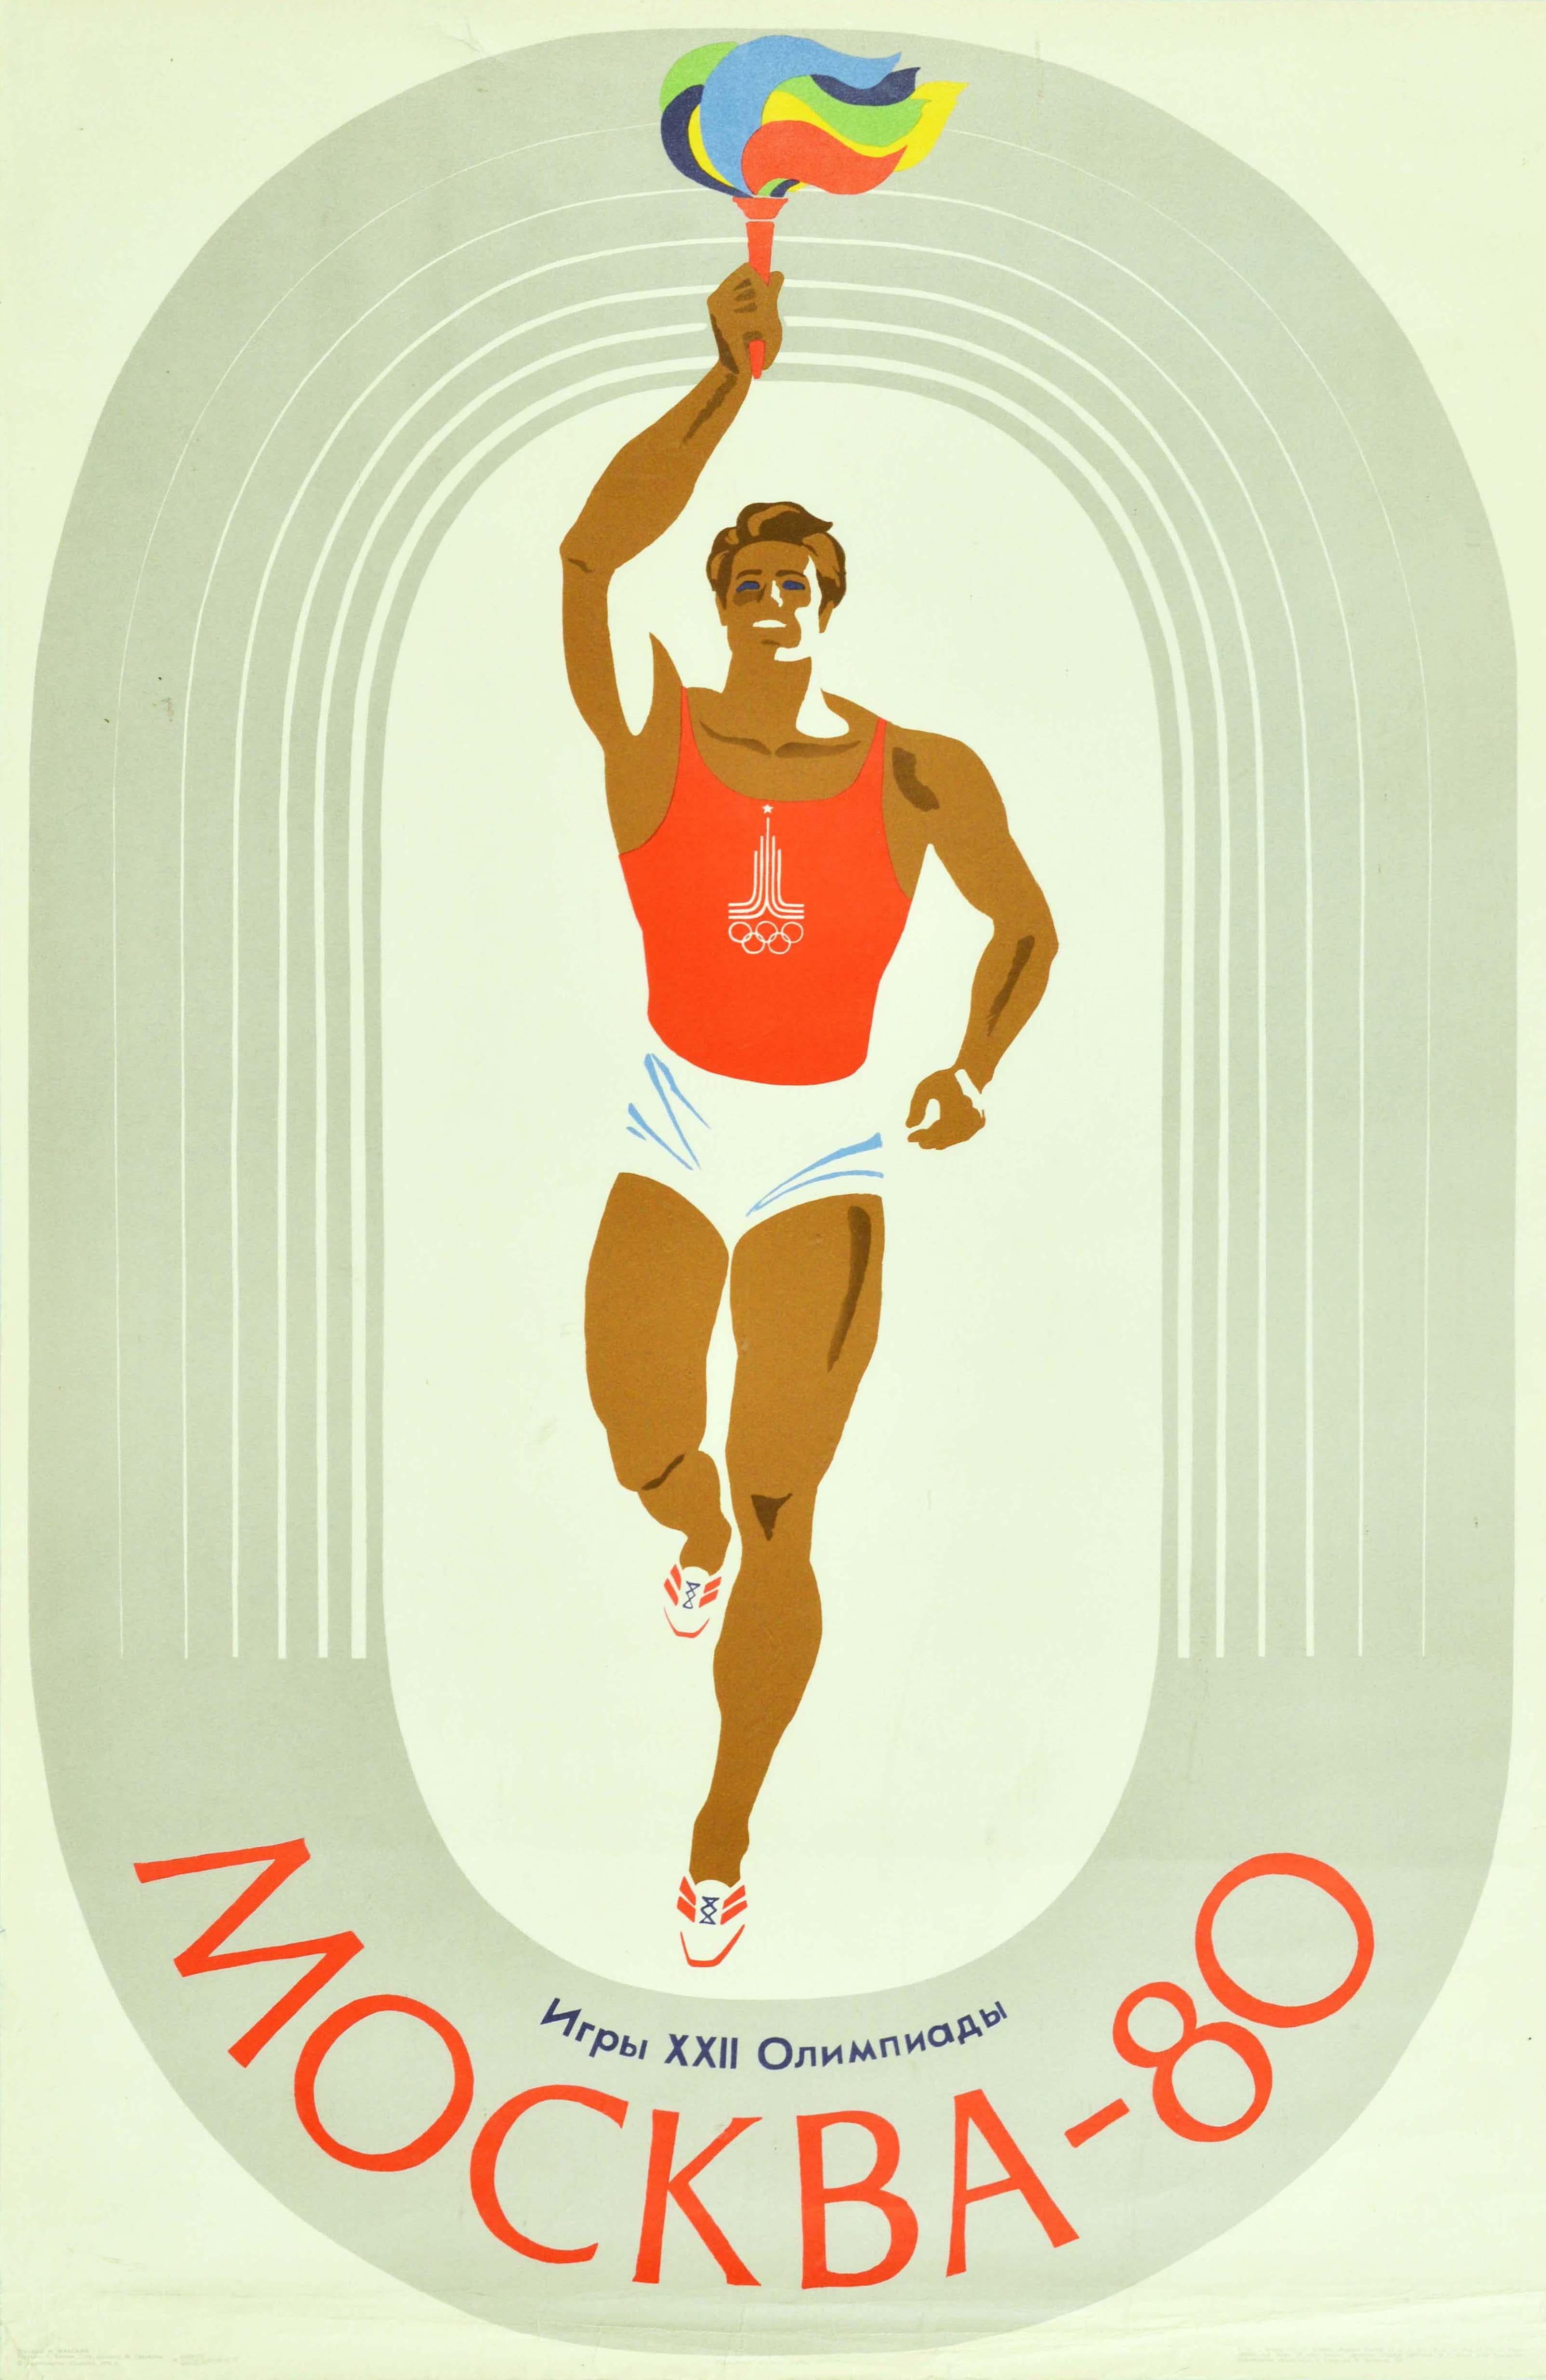 Original Vintage Sport Poster Olympic Games Moscow 80 Athletics Track Runner